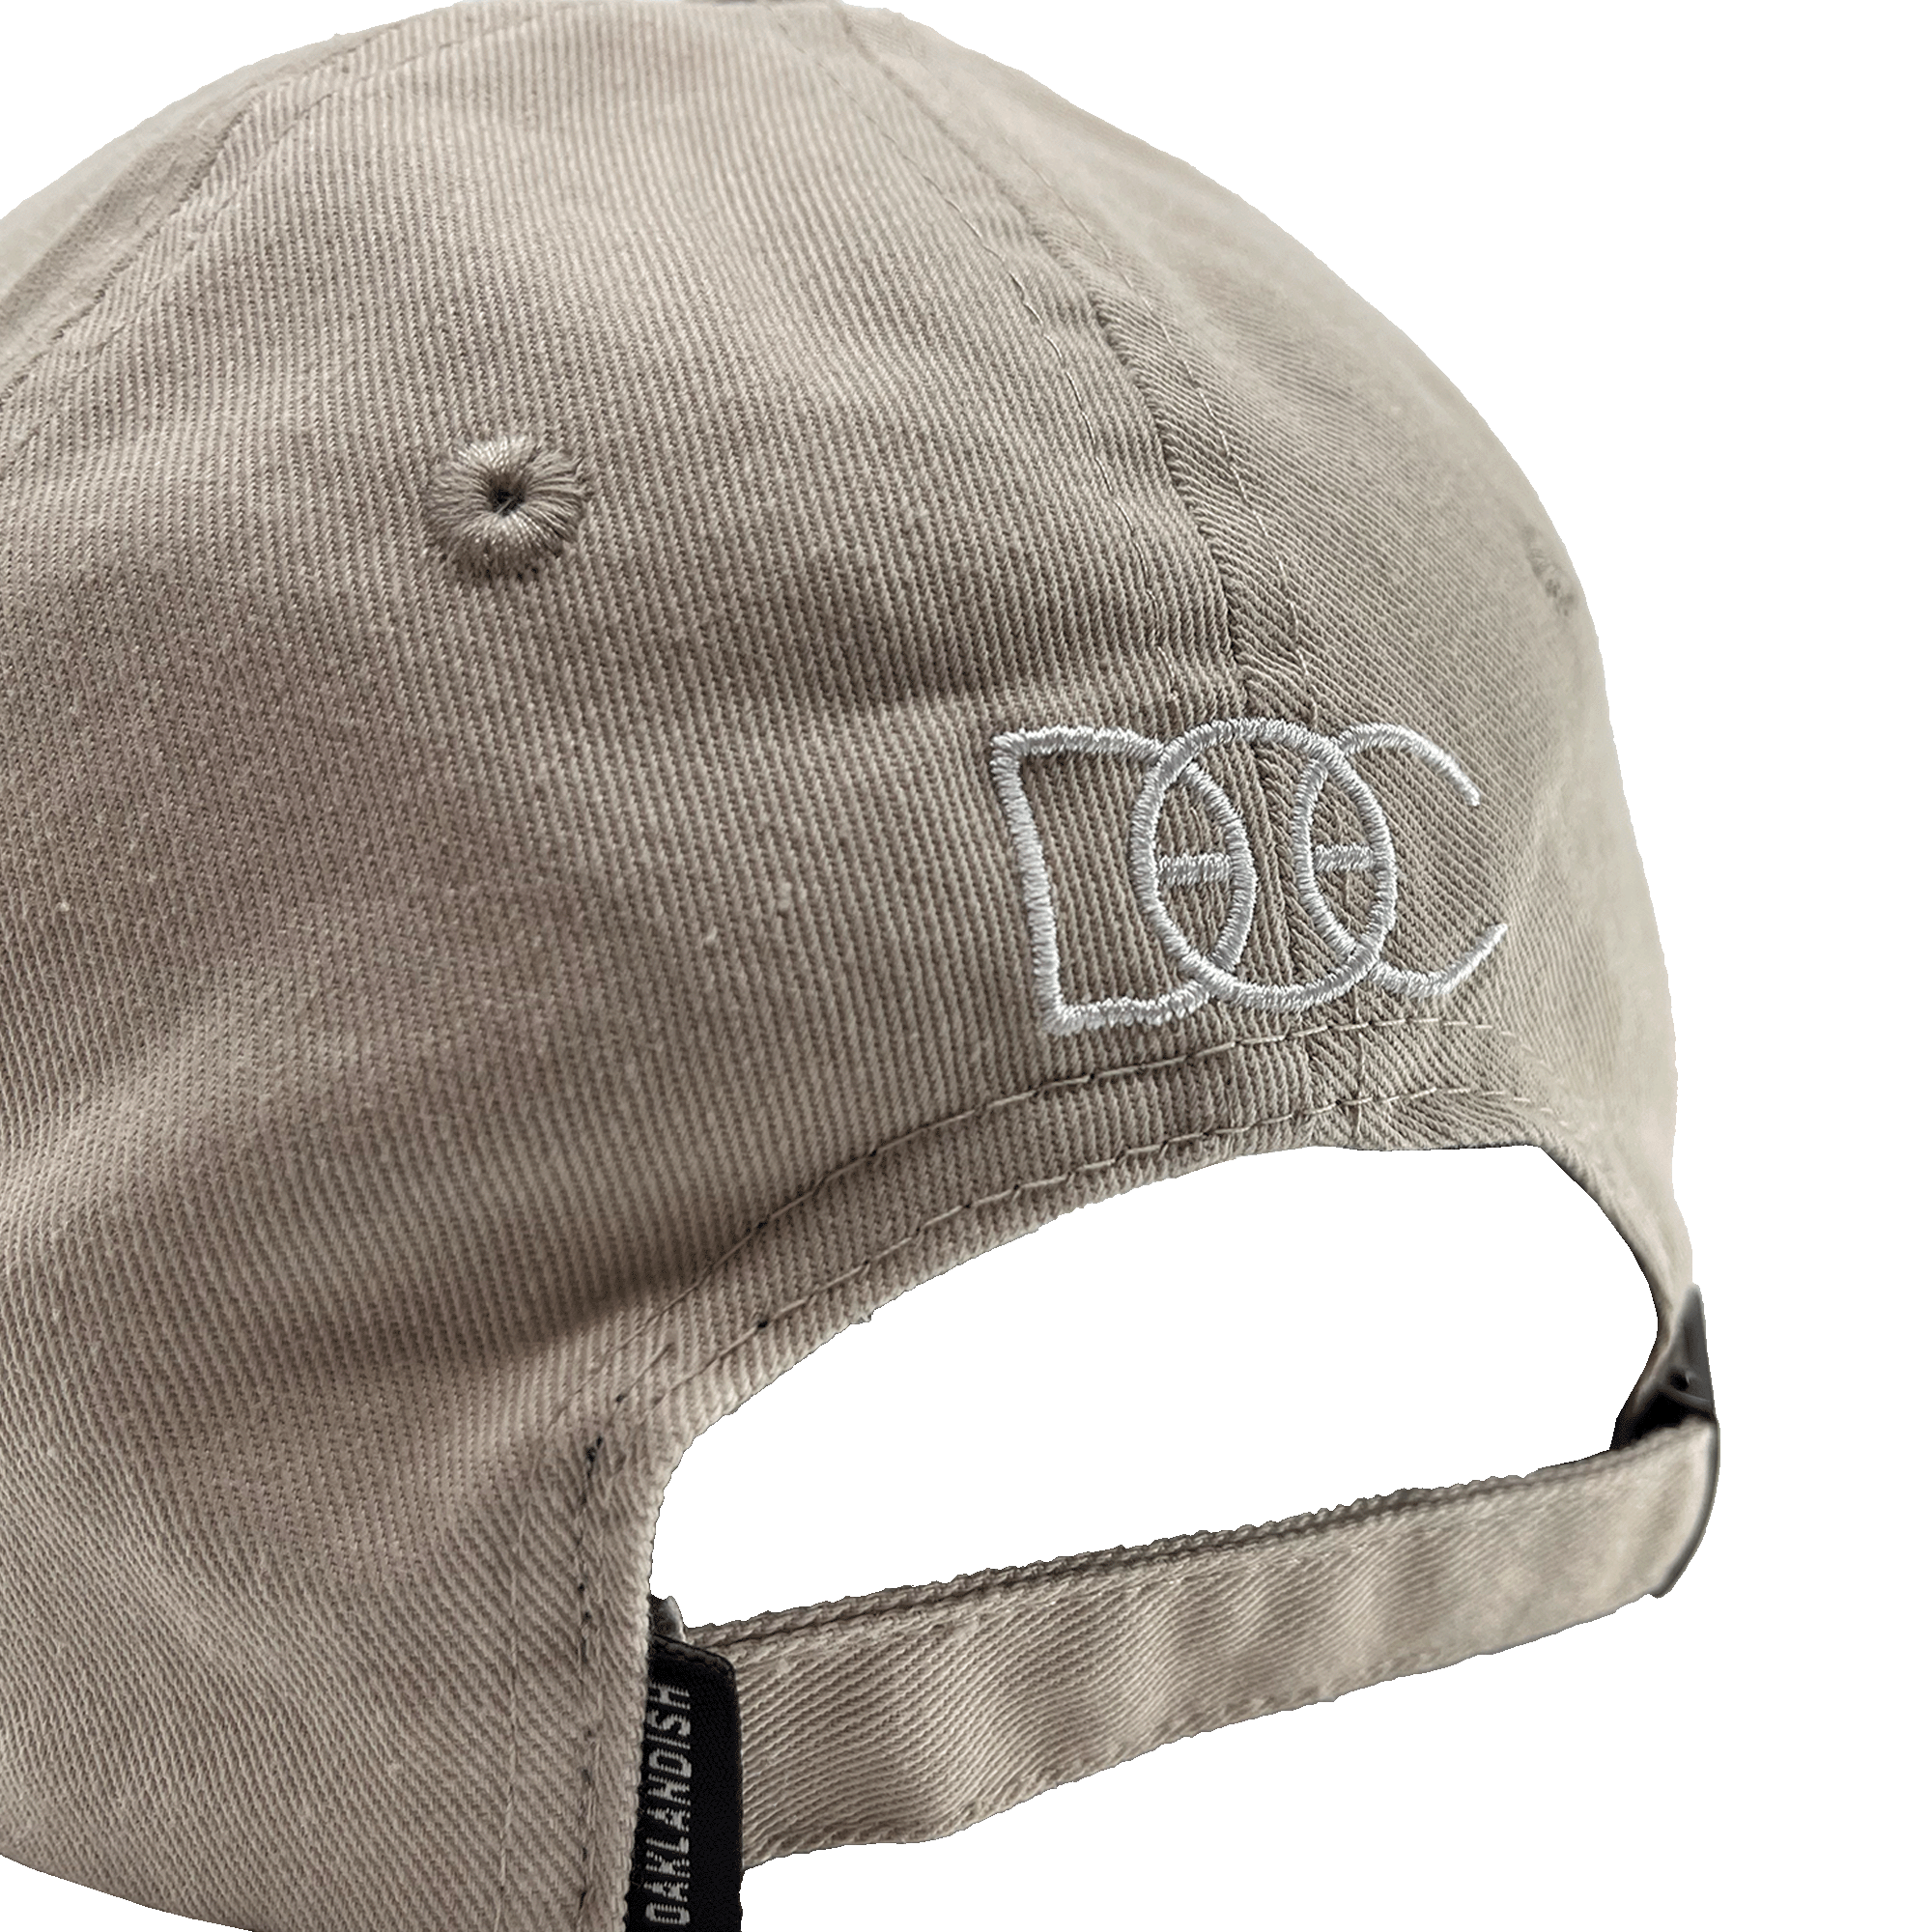 Angled back view of khaki Oakland Dad Hat designed by Dustin O. Canalin white embroidered DOC wordmark, adjustable strapback, and small Oaklandish wordmark tag.